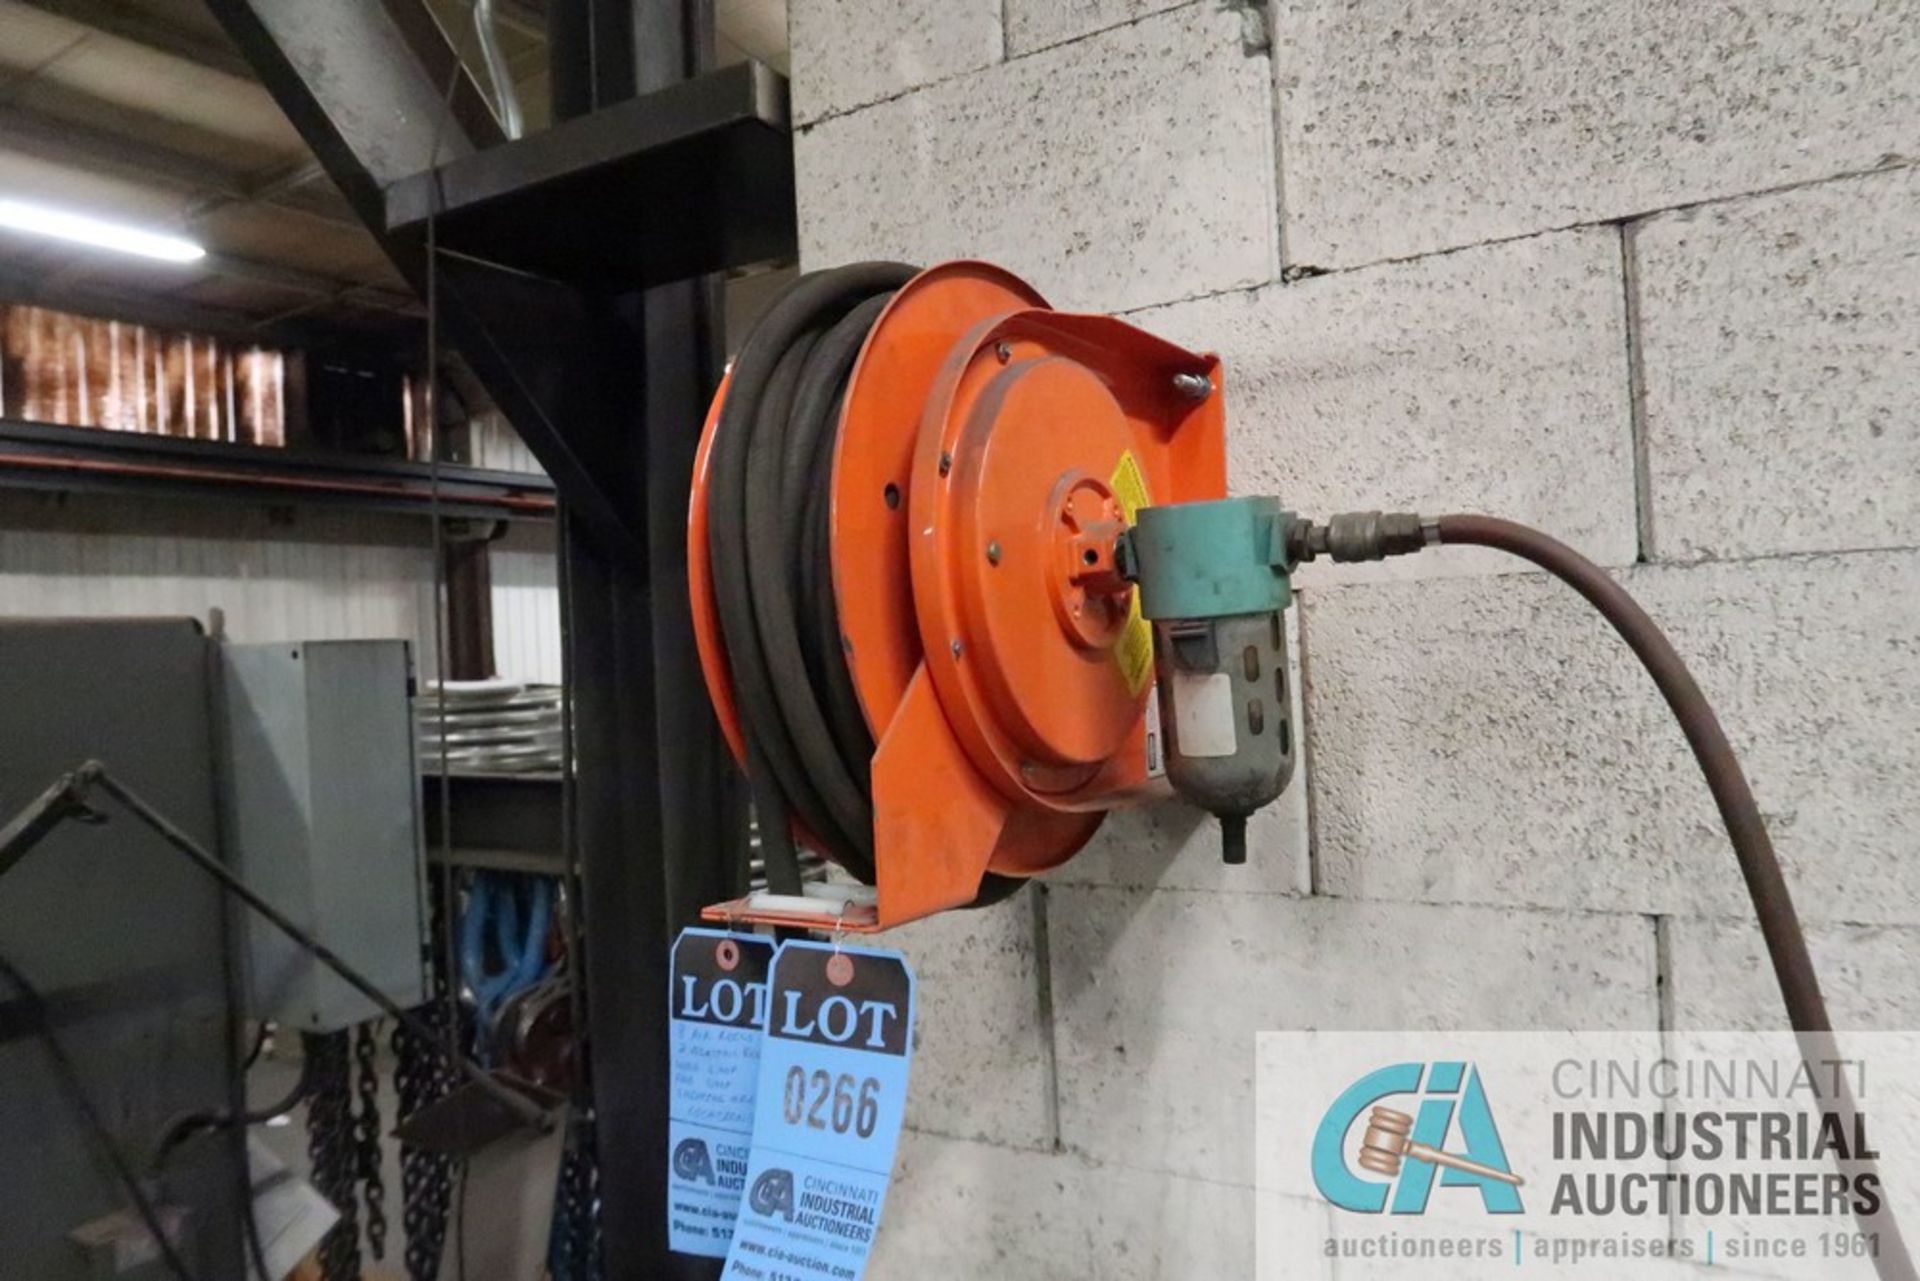 (LOT) (8) AIR HOSE REELS, (2) ELECTRIC CORD REELS - LOCATED IN SHIPPING, WELD SHOP AND FAB SHOP